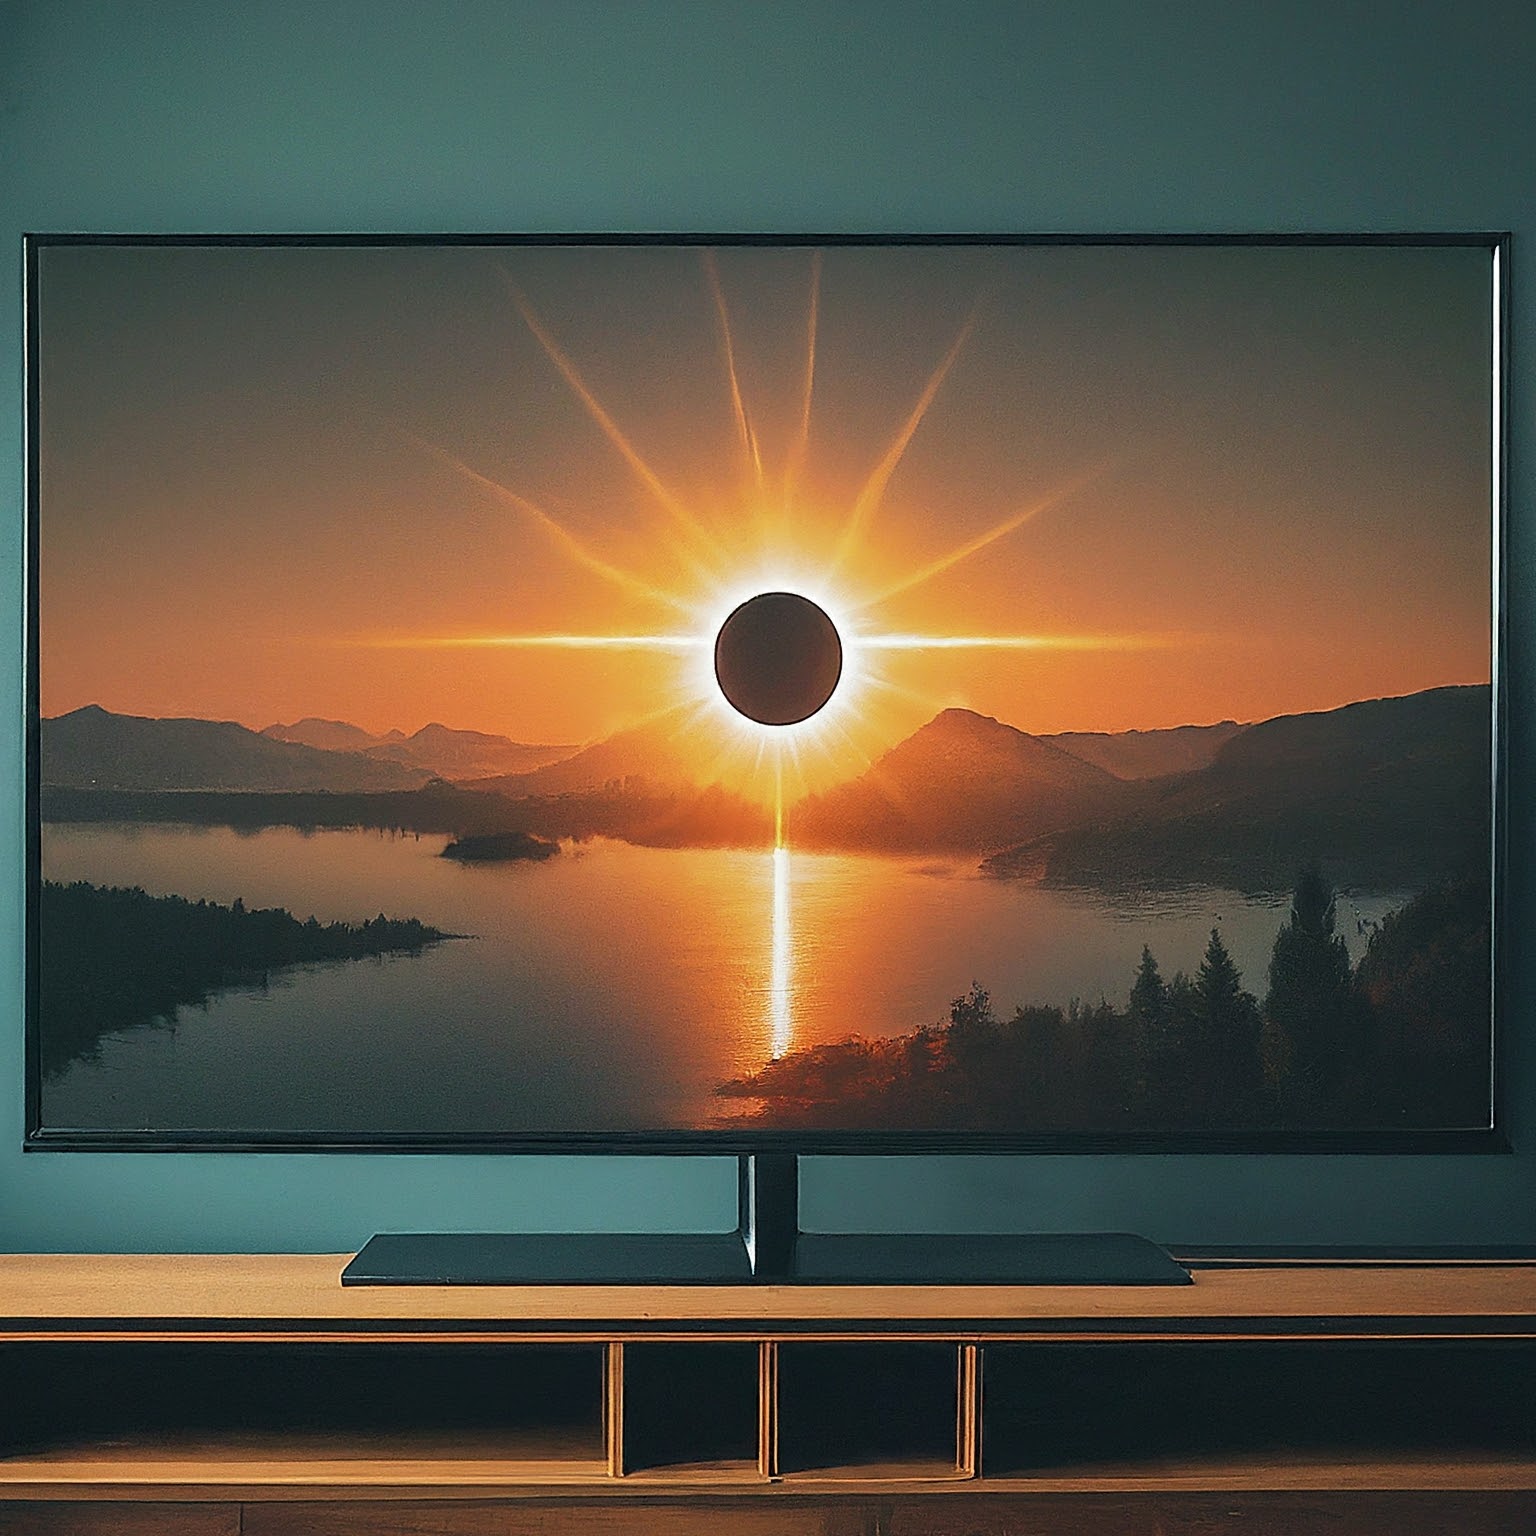 Solar eclipse on a TV screen